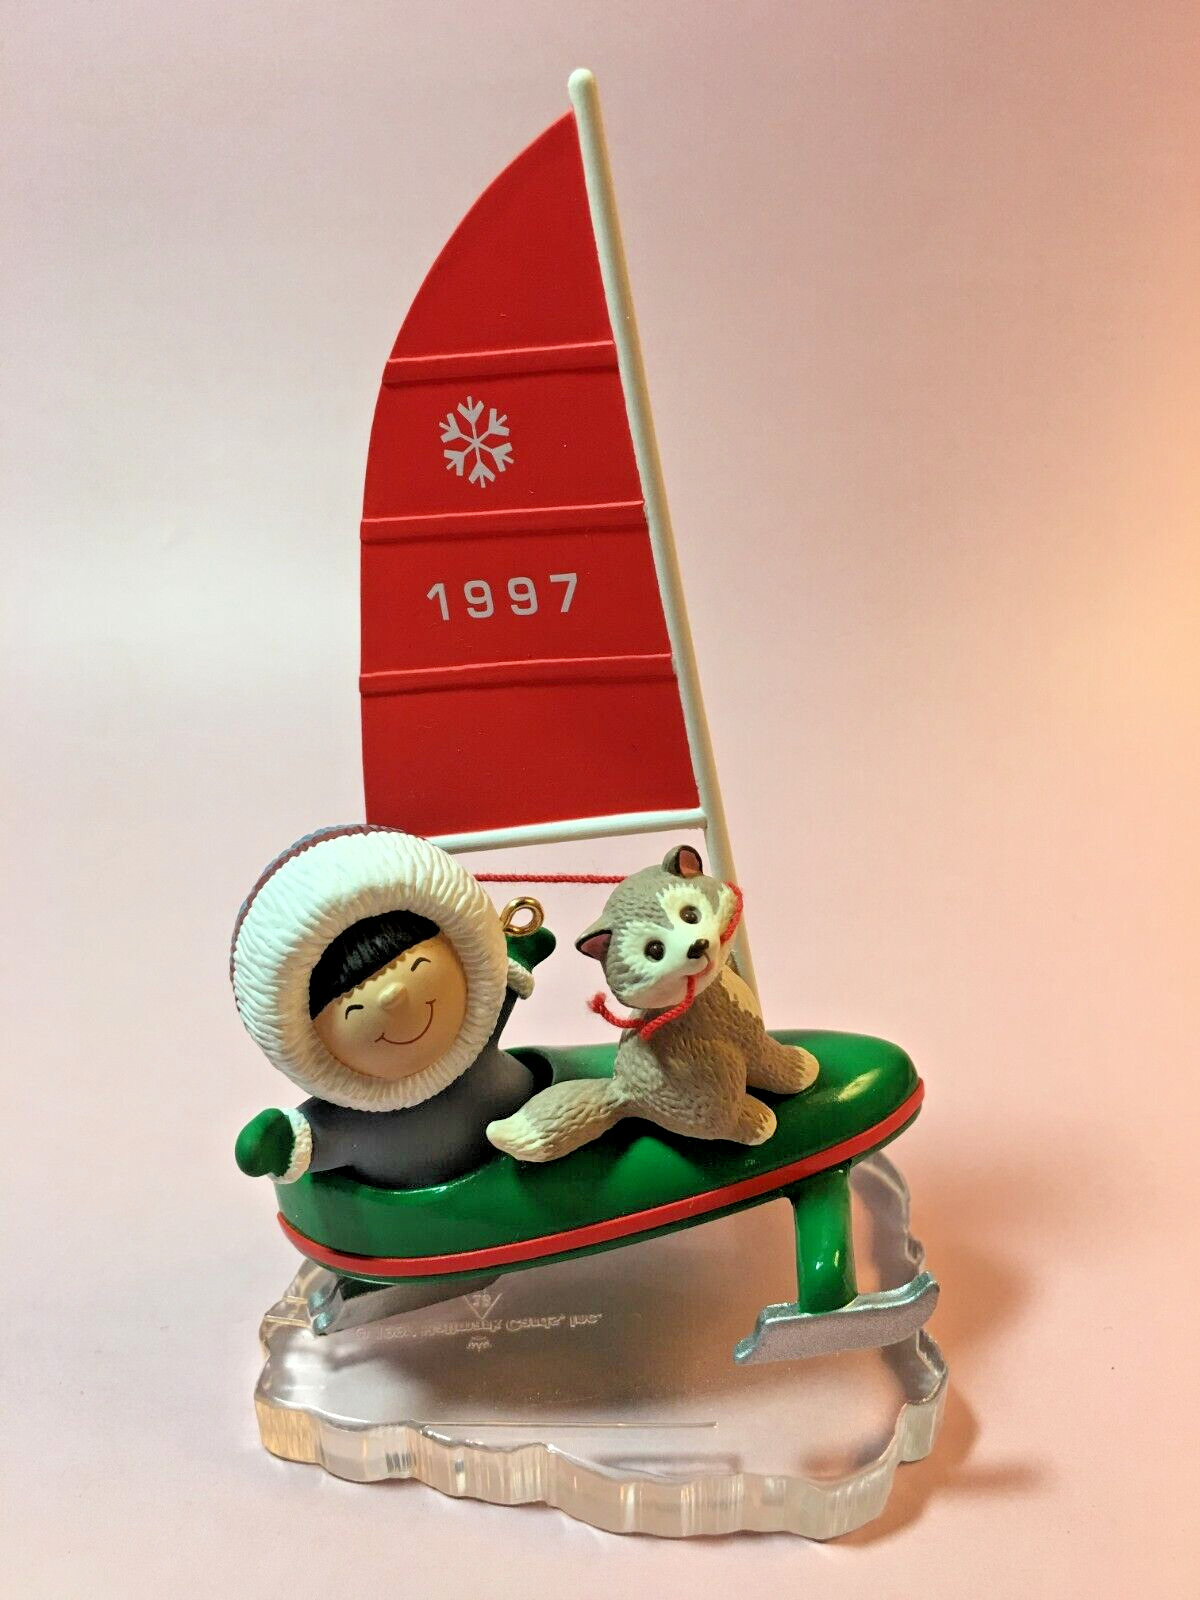 Sailing Ornament -Frosty Friends 1997 Hallmark Christmas Ornament #18 in Series